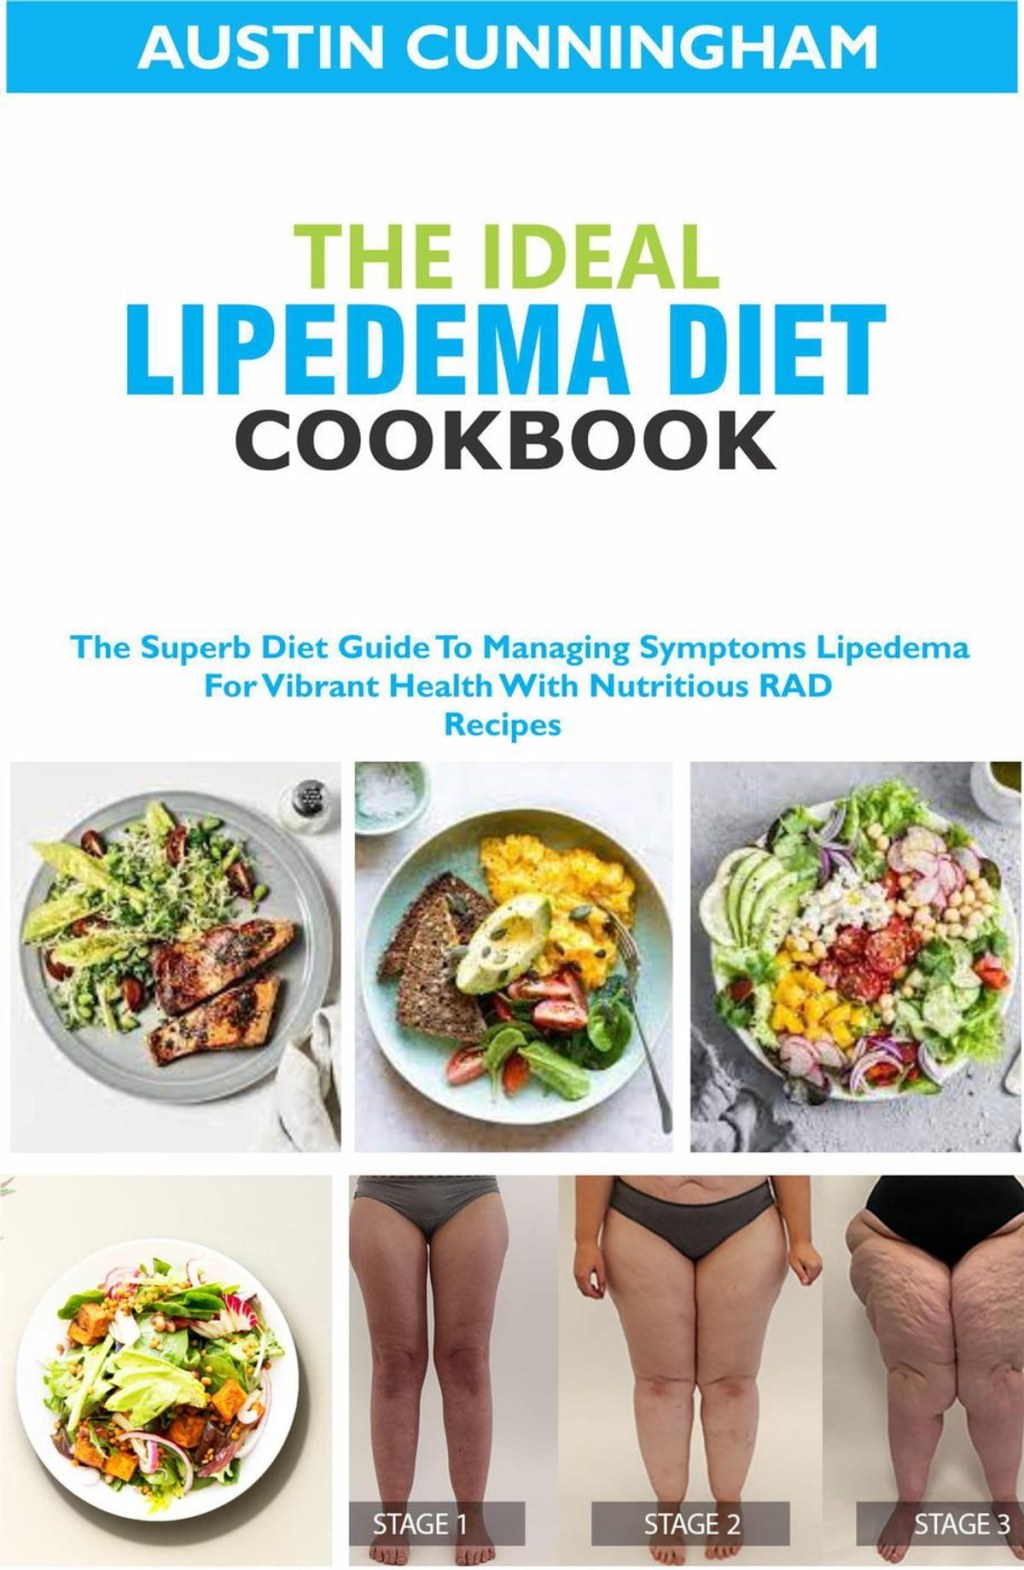 Picture of: The Ideal Lipedema Diet Cookbook; The Superb Diet Guide To Managing  Symptoms Lipedema For Vibrant Health With Nutritious RAD Recipes eBook by  Austin